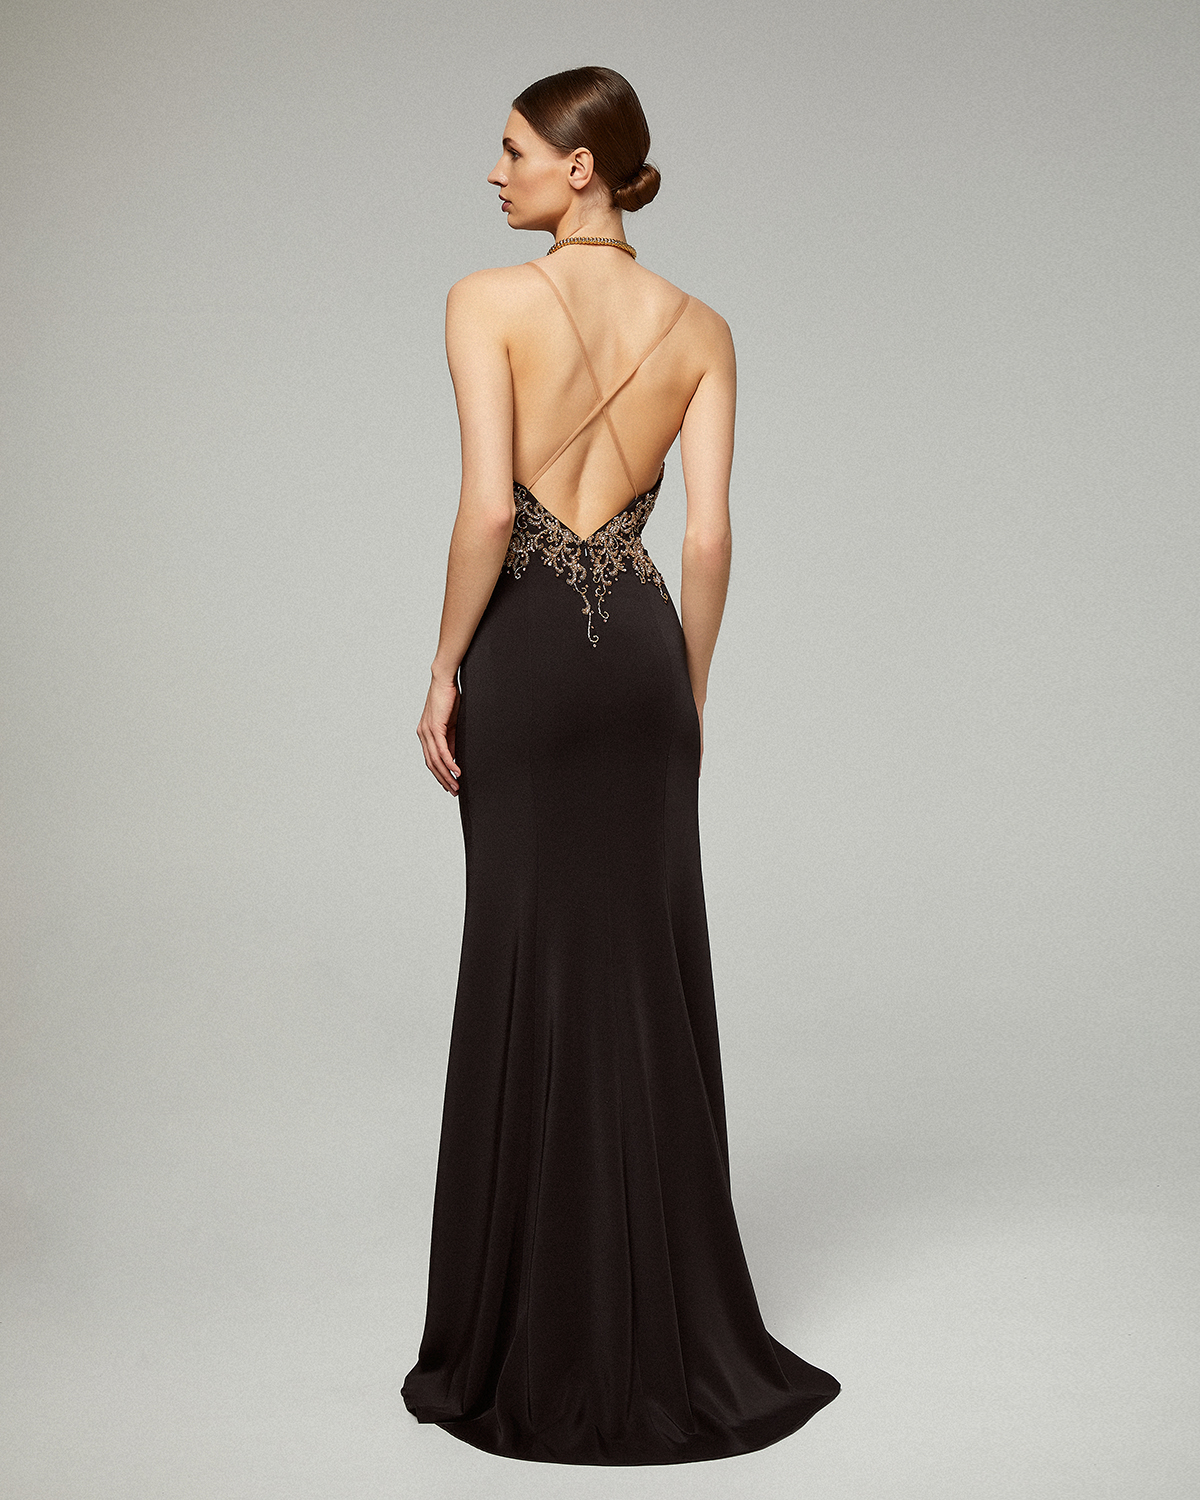 Long evening dress with beading on the top and open back